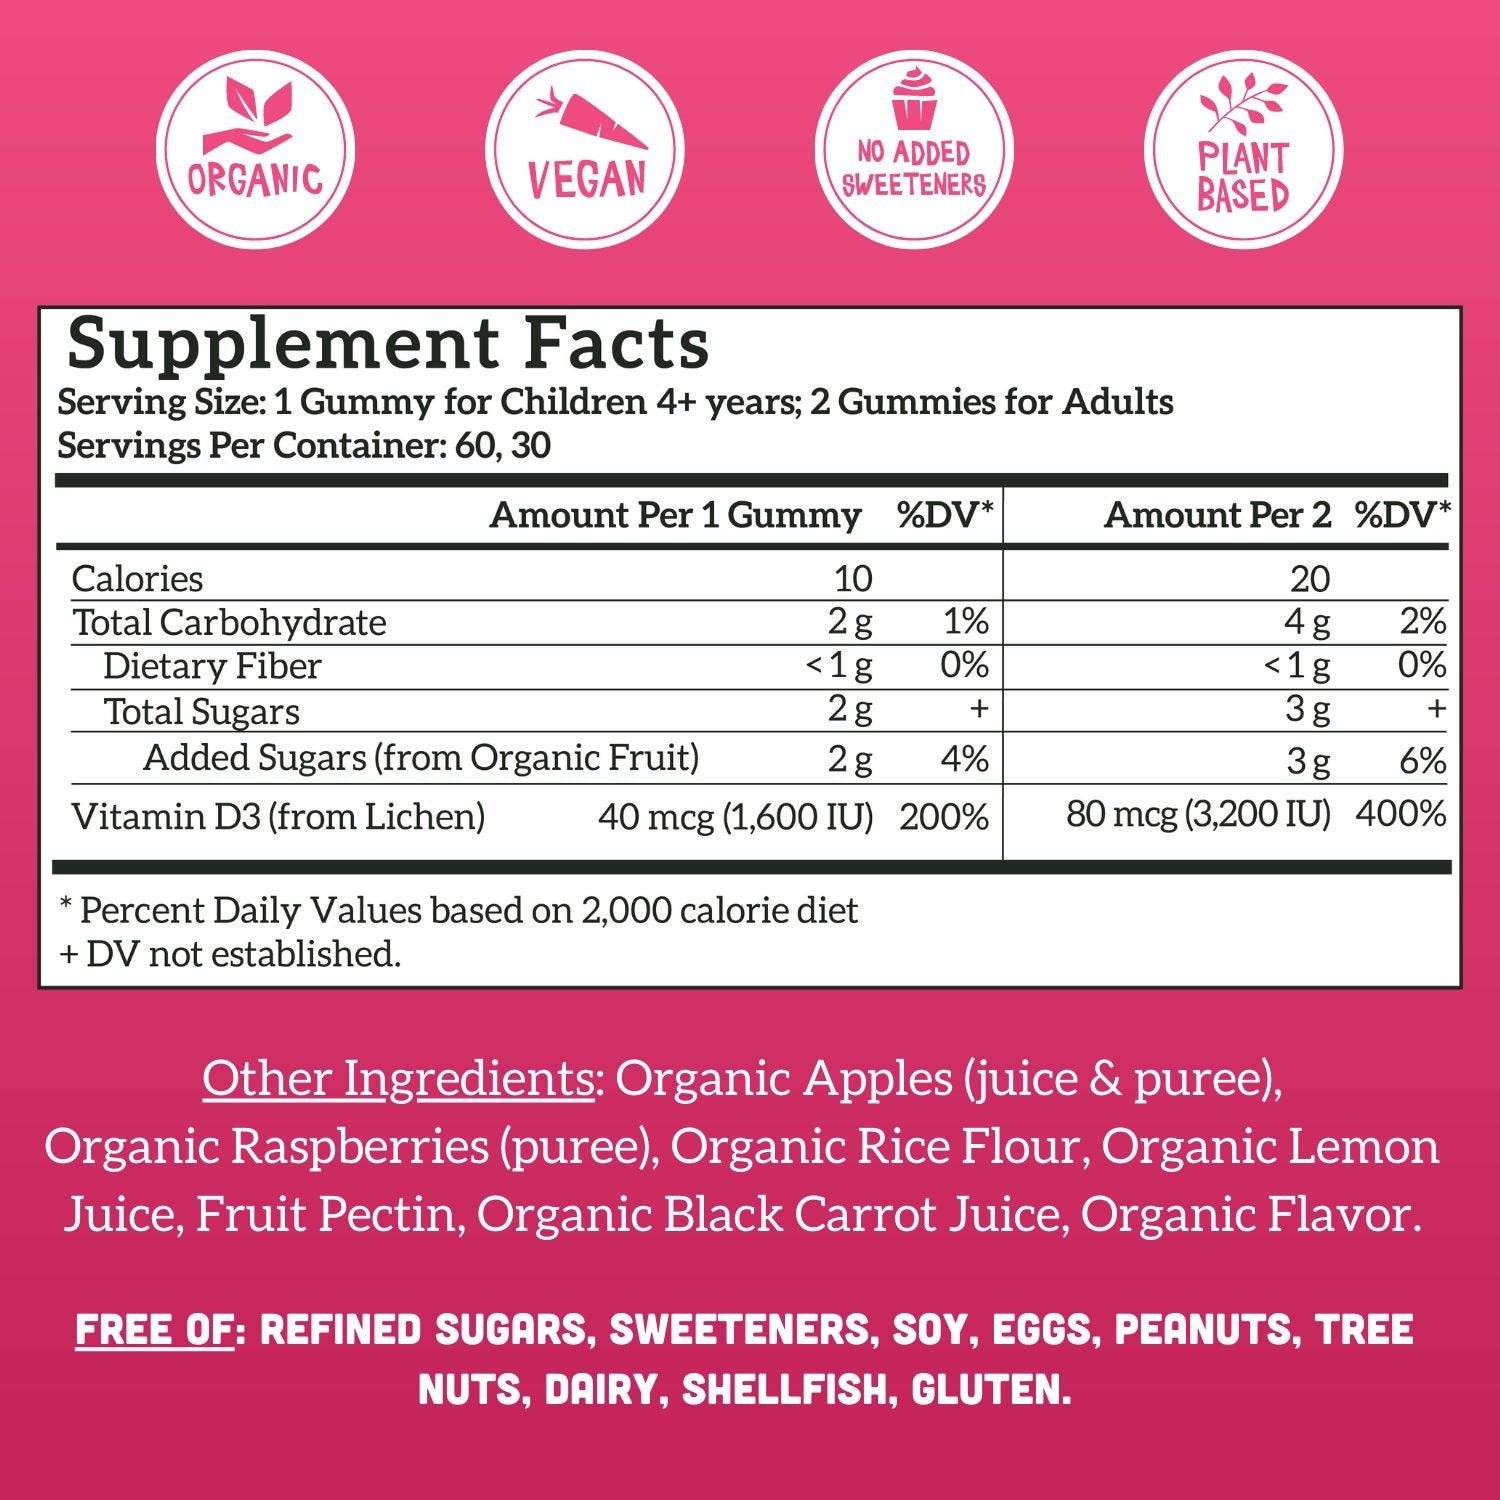 Llama Naturals Real Fruit Gummy Vitamins for Adults, No Added Sugar Cane,  Whole Food Multivitamin Gummies for Women and Men, Vegan, Organic, Plant